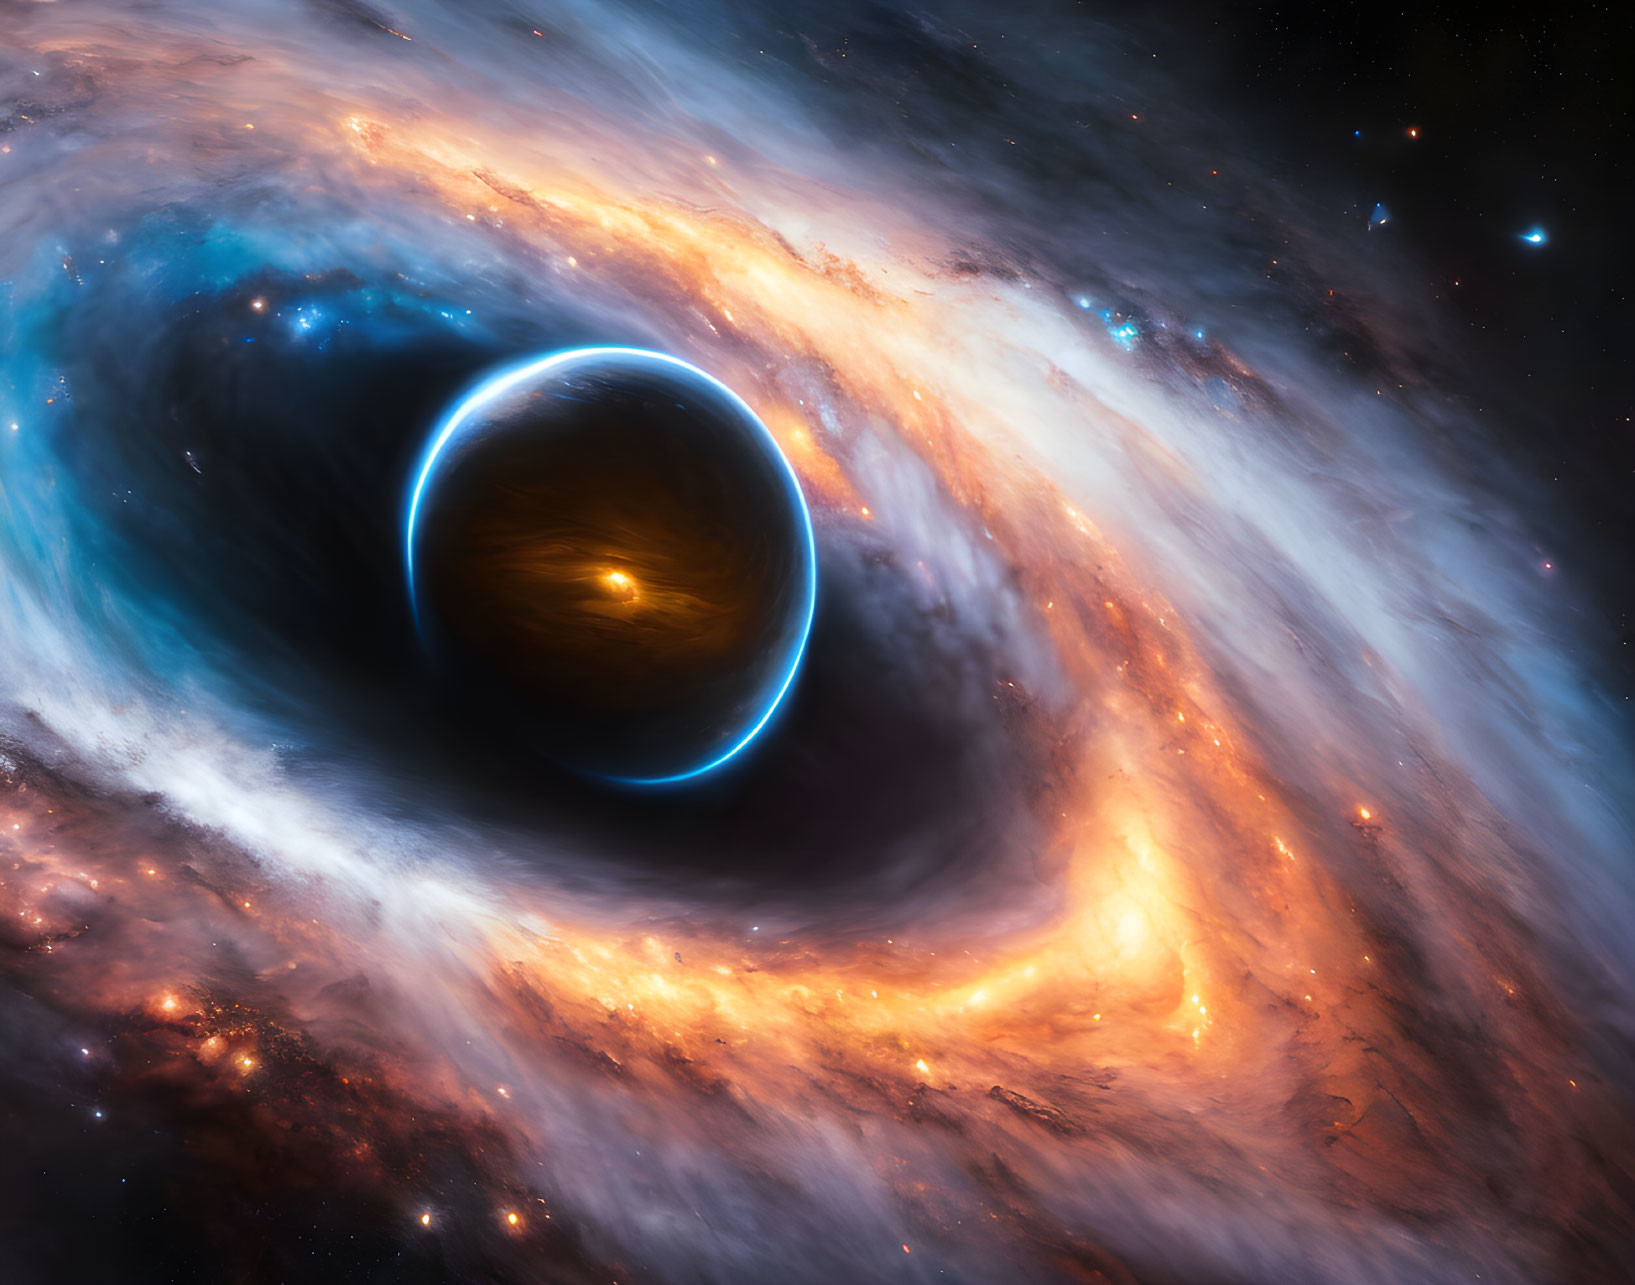 Detailed portrayal of black hole with swirling oranges and blues in space